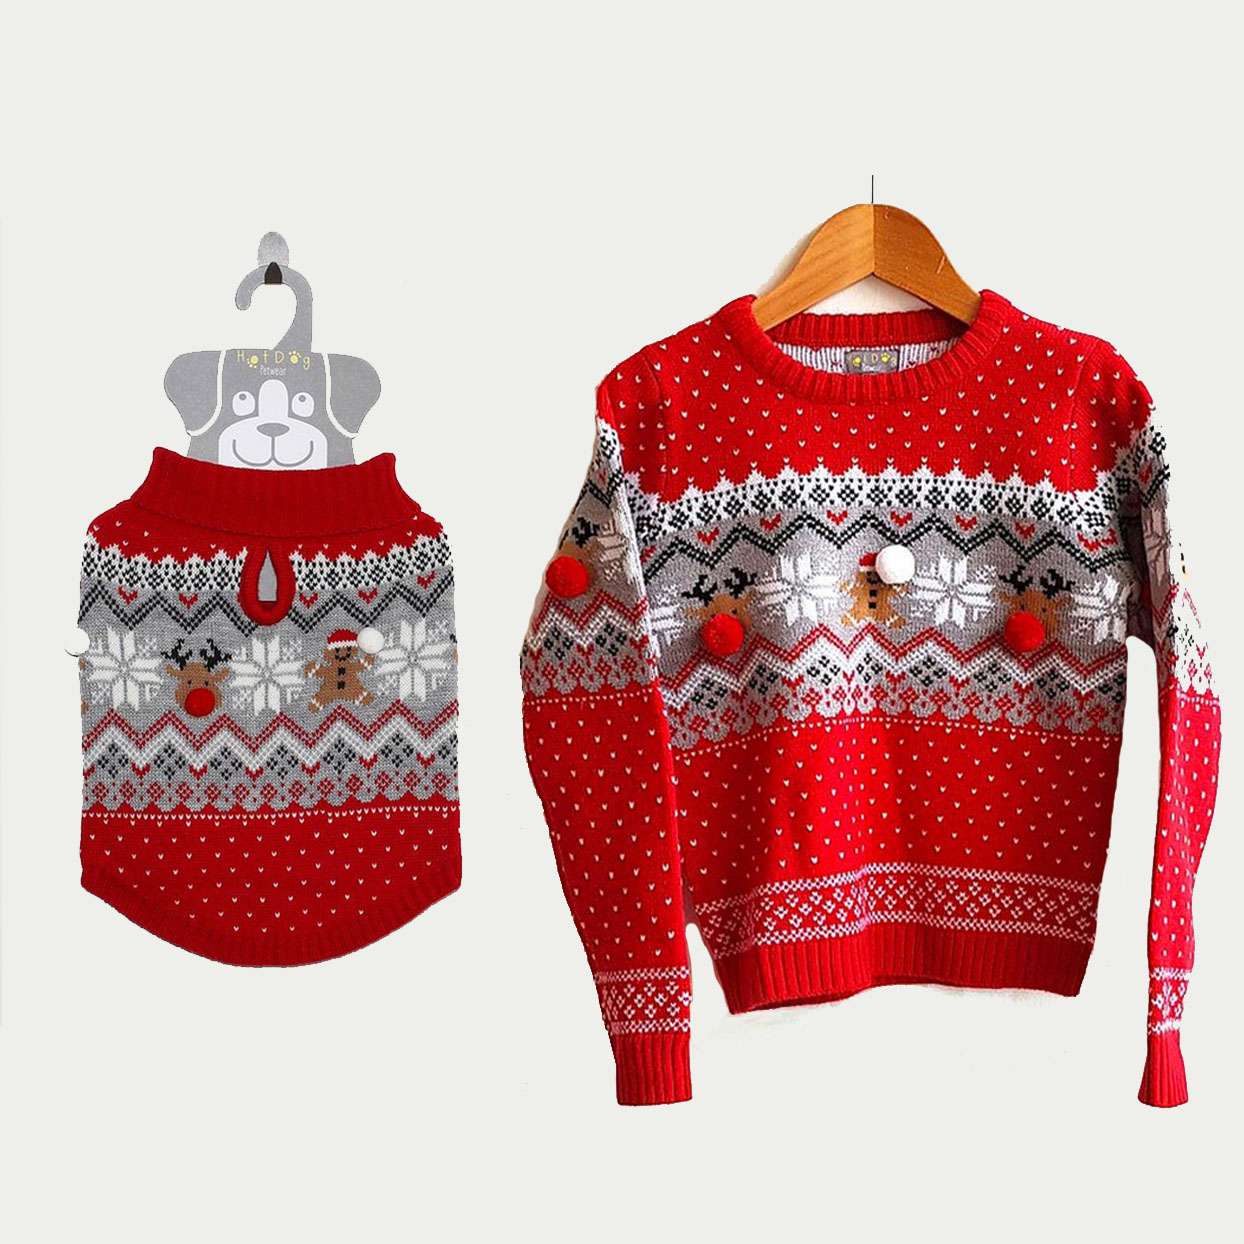 Doggie Style Store Red White Stripe Reindeer Rudolph Cat Pet Kitten Knitted Jumper Knitwear Christmas Xmas Sweater Size XS